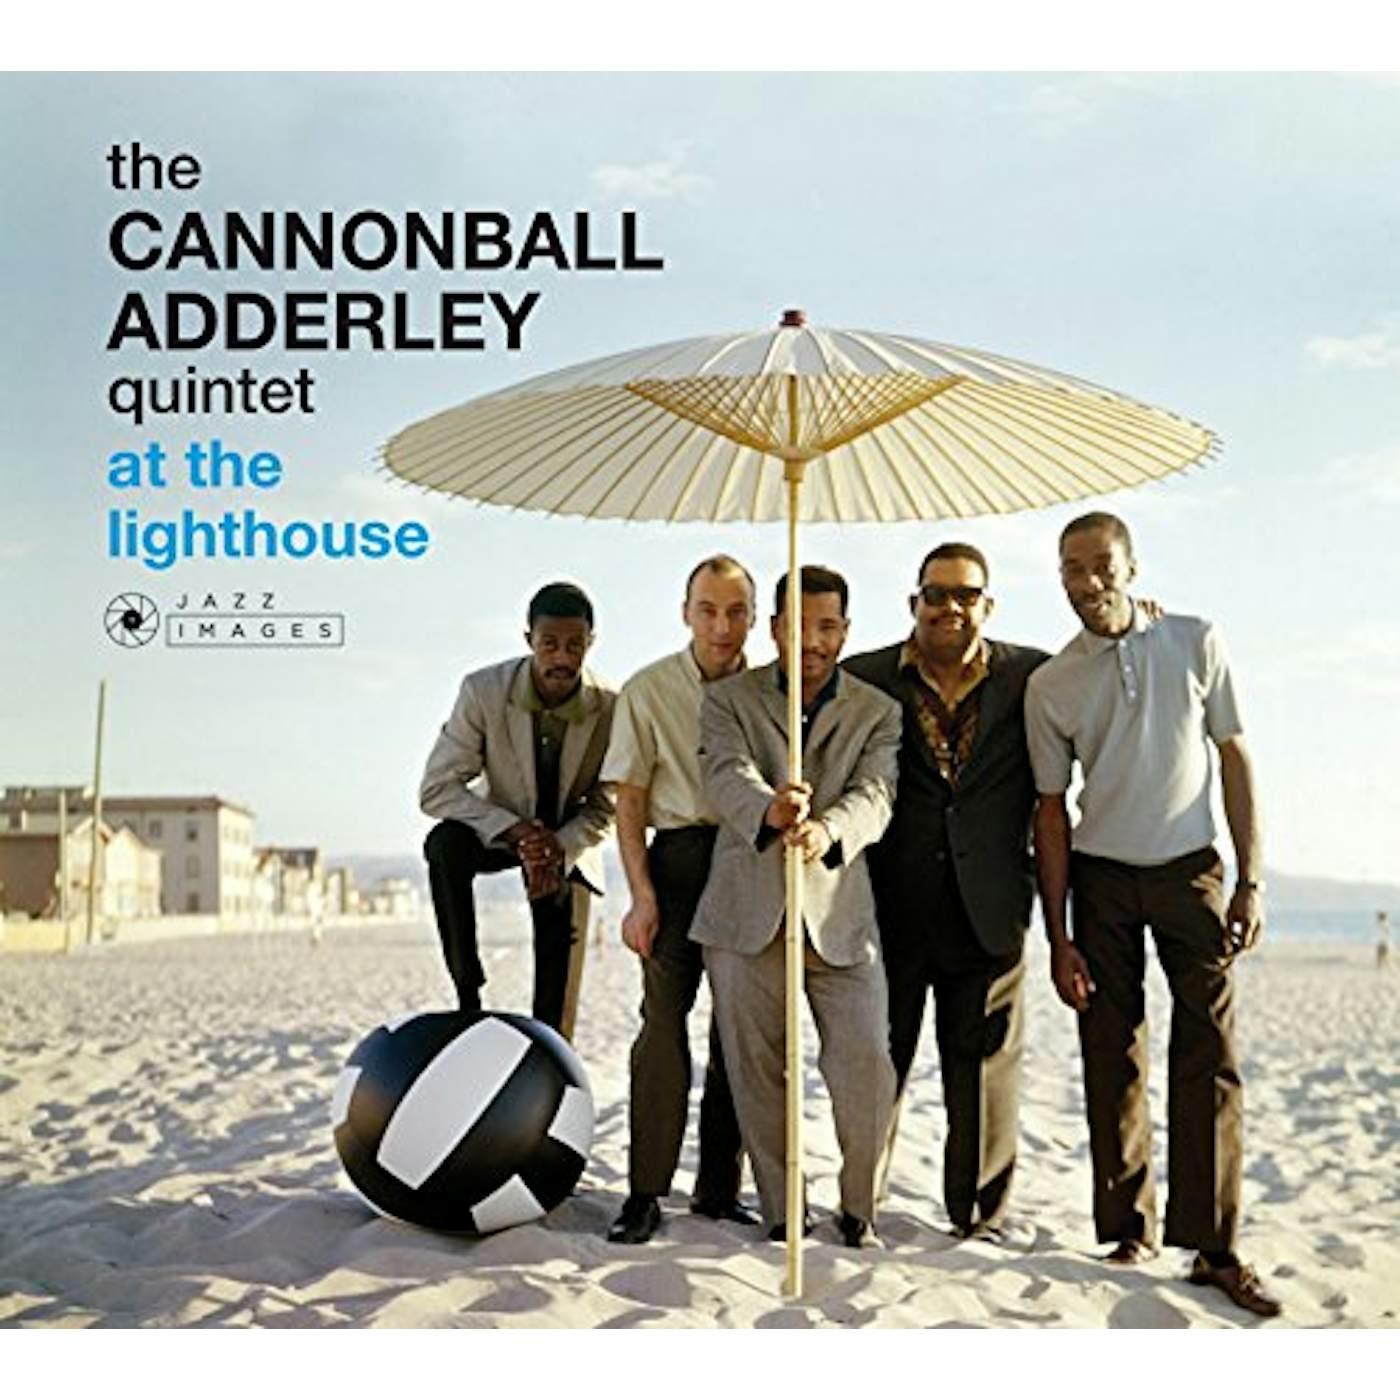 CANNONBALL ADDERLEY QUINTET AT THE LIGHTHOUSE CD